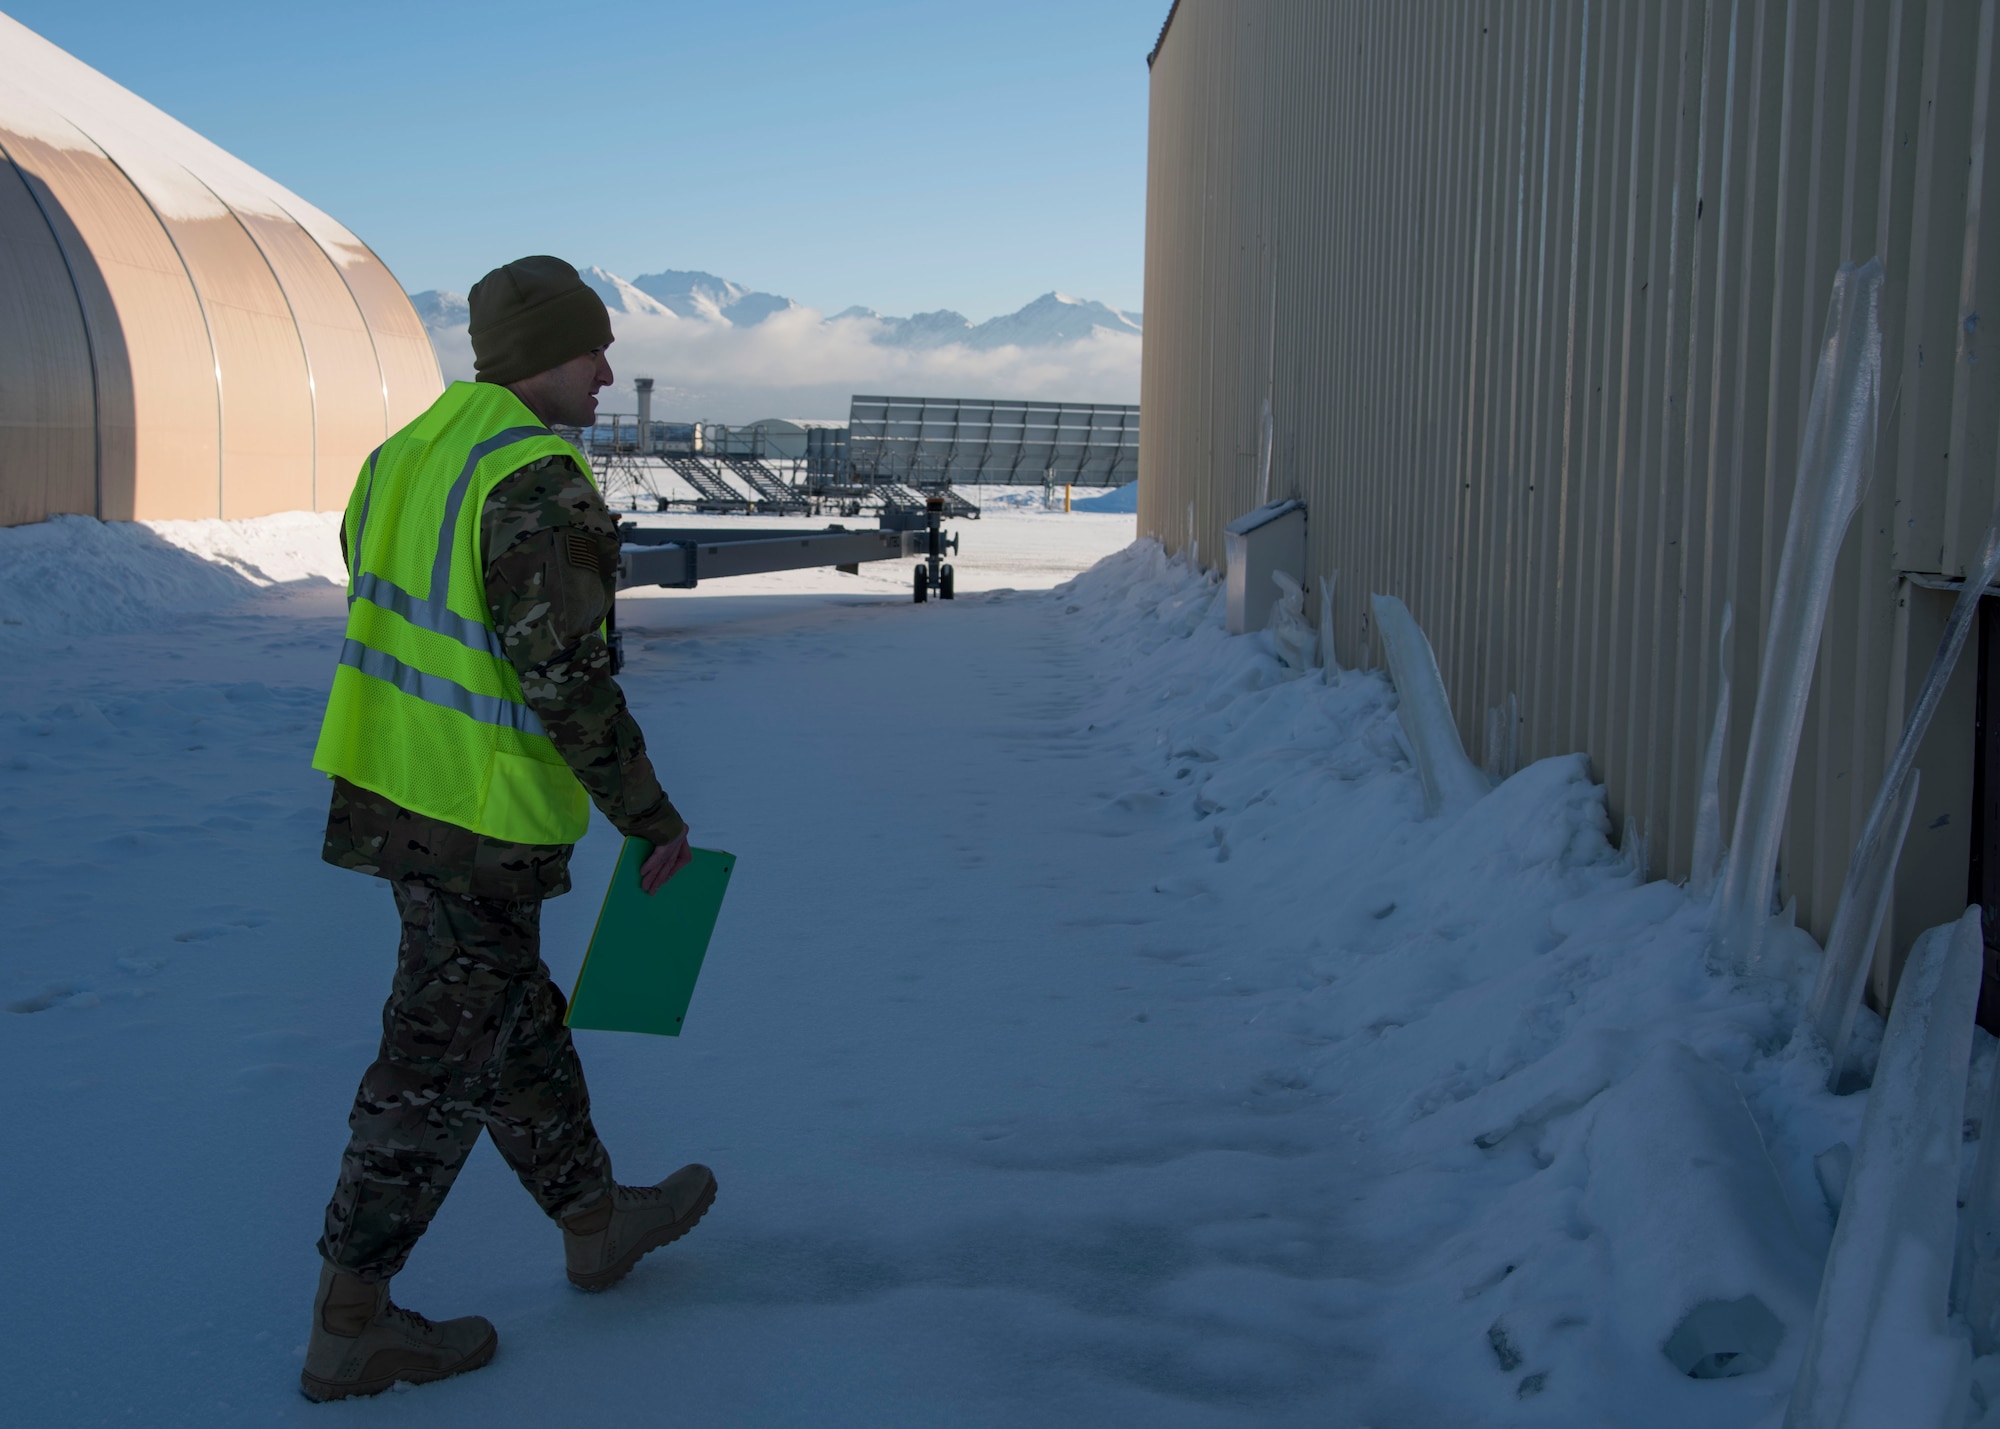 U.S. Air Force Master Sgt. David Ballew, 673d CES project manager, performs a post-earthquake inspection of a facility at Joint Base Elmendorf-Richardson, Alaska, Jan. 31, 2019. Since the Nov. 30, 2018 earthquake more than 20 CES Airmen have been trained in the ATC-20-1 Post-earthquake Safety Evaluation of Buildings to maintain and improve agile support capabilities.